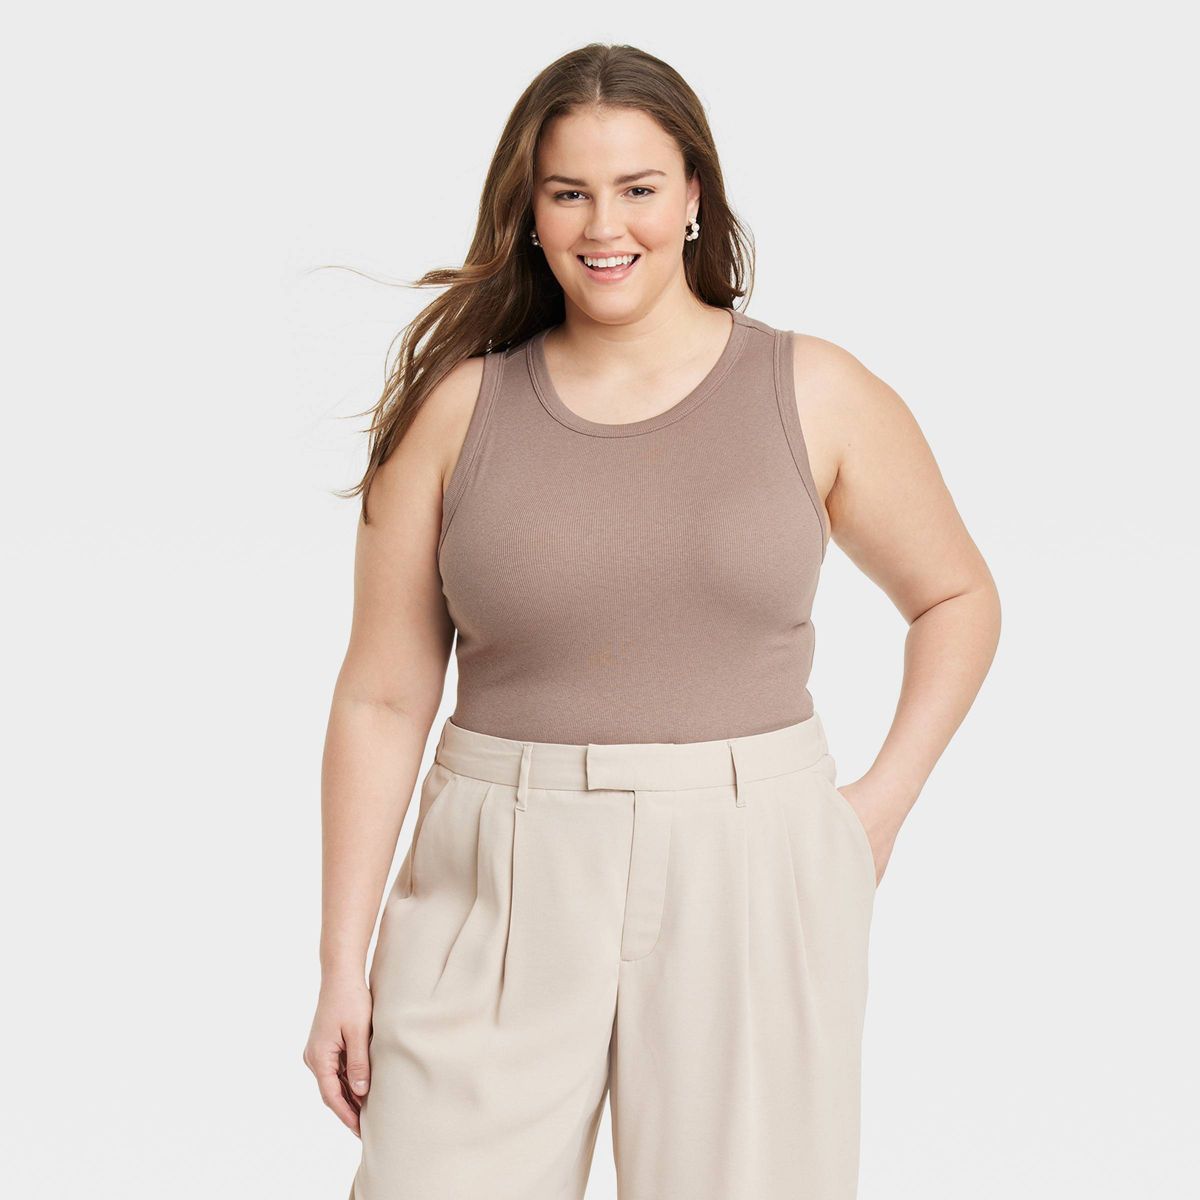 Women's Slim Fit Ribbed High Neck Tank Top - A New Day™ Tan XS | Target